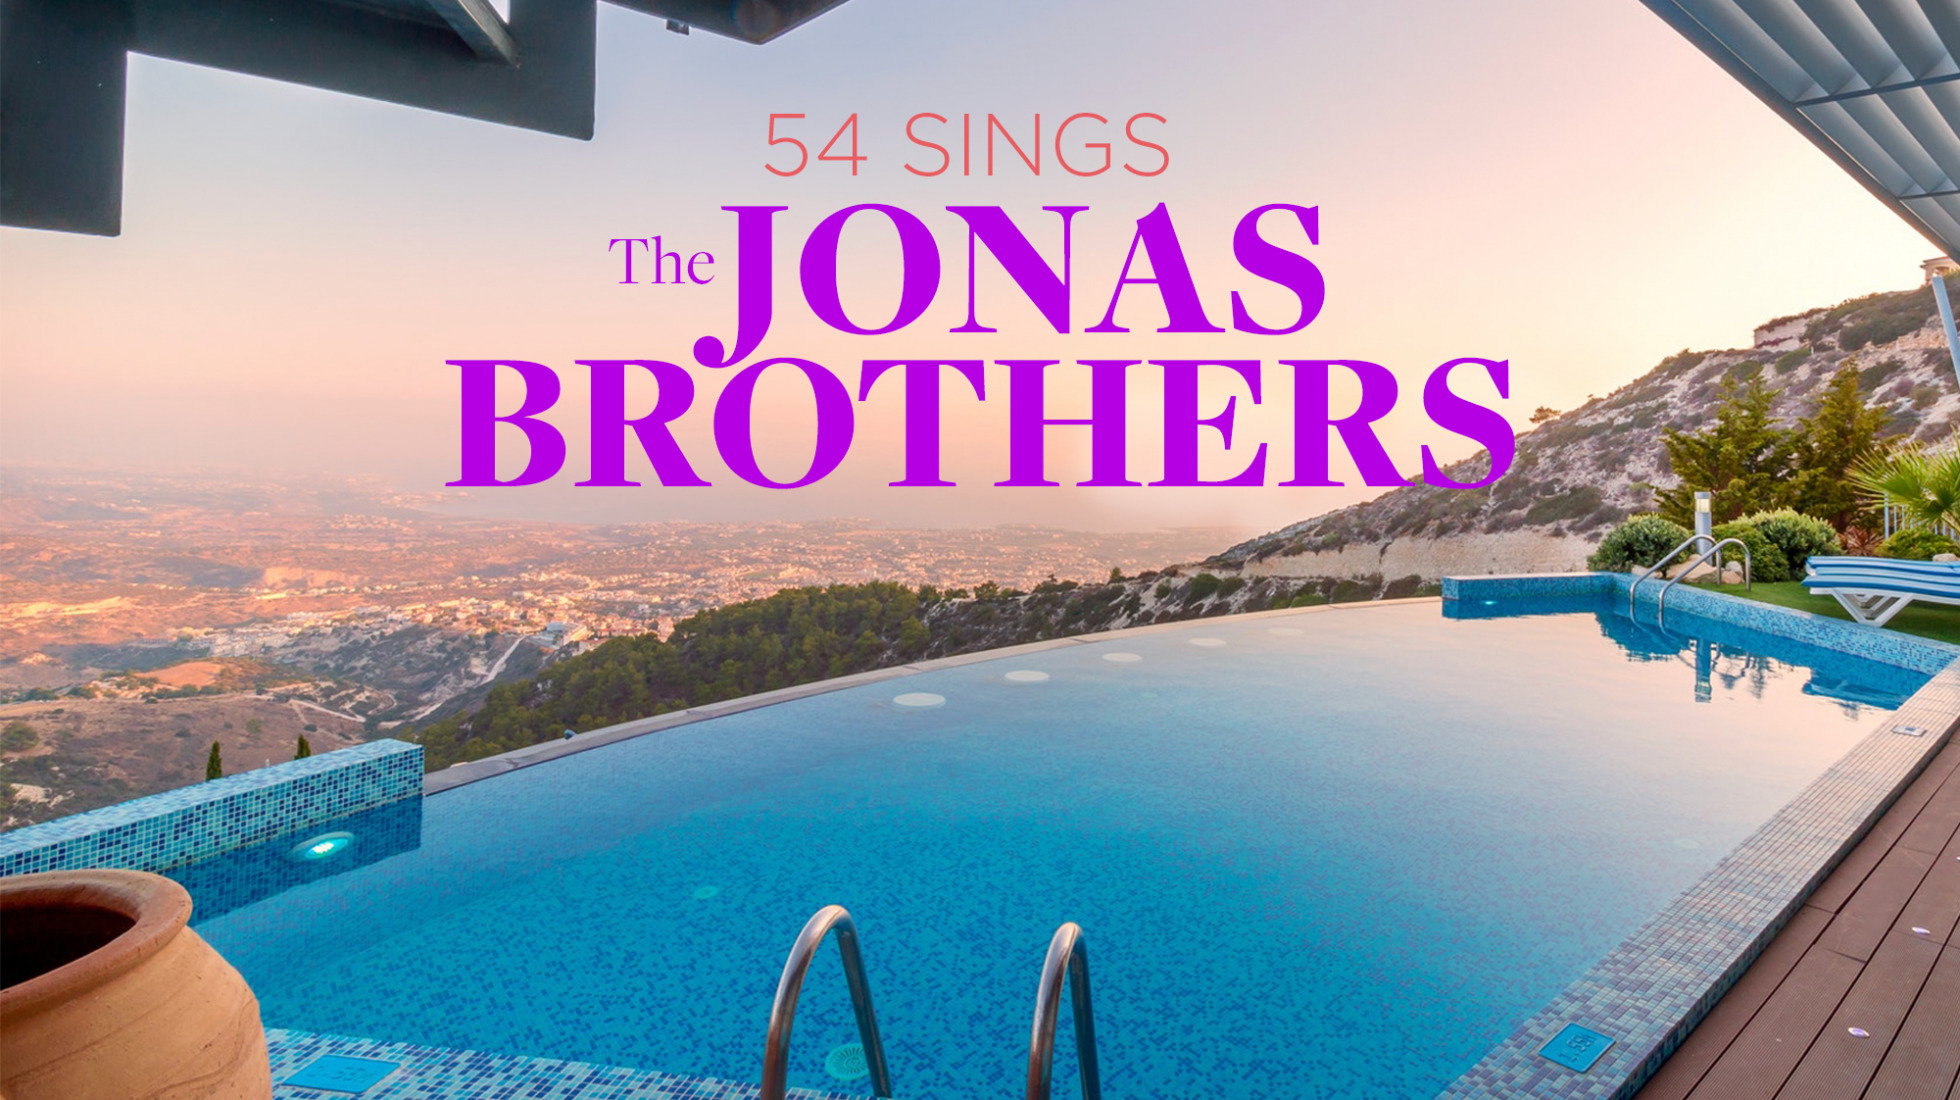 Presley Ryan and Analise Scarpaci To Sing Jonas Brothers Music at 54 Below, and more!